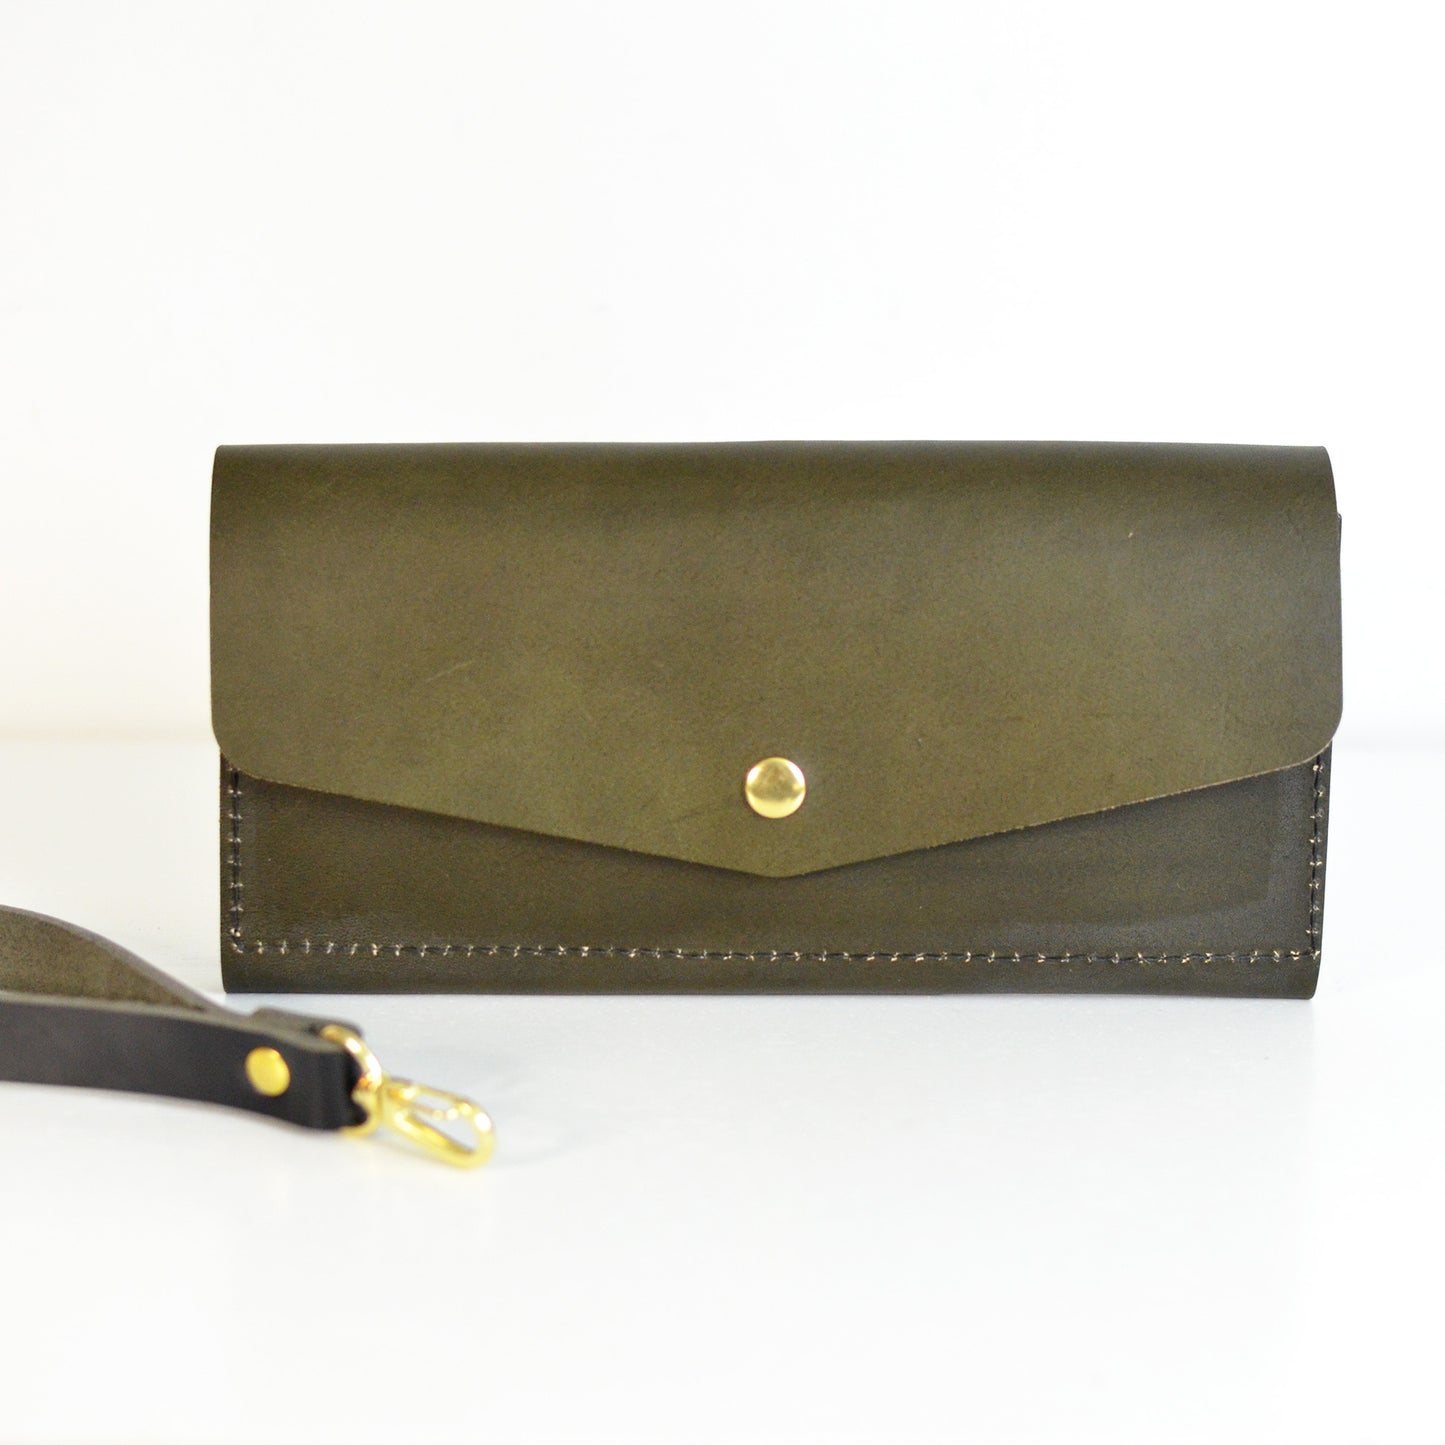 READY-to-SEND Wristlet Wallet Clutch - LIMITED EDITION Deep Green Leather